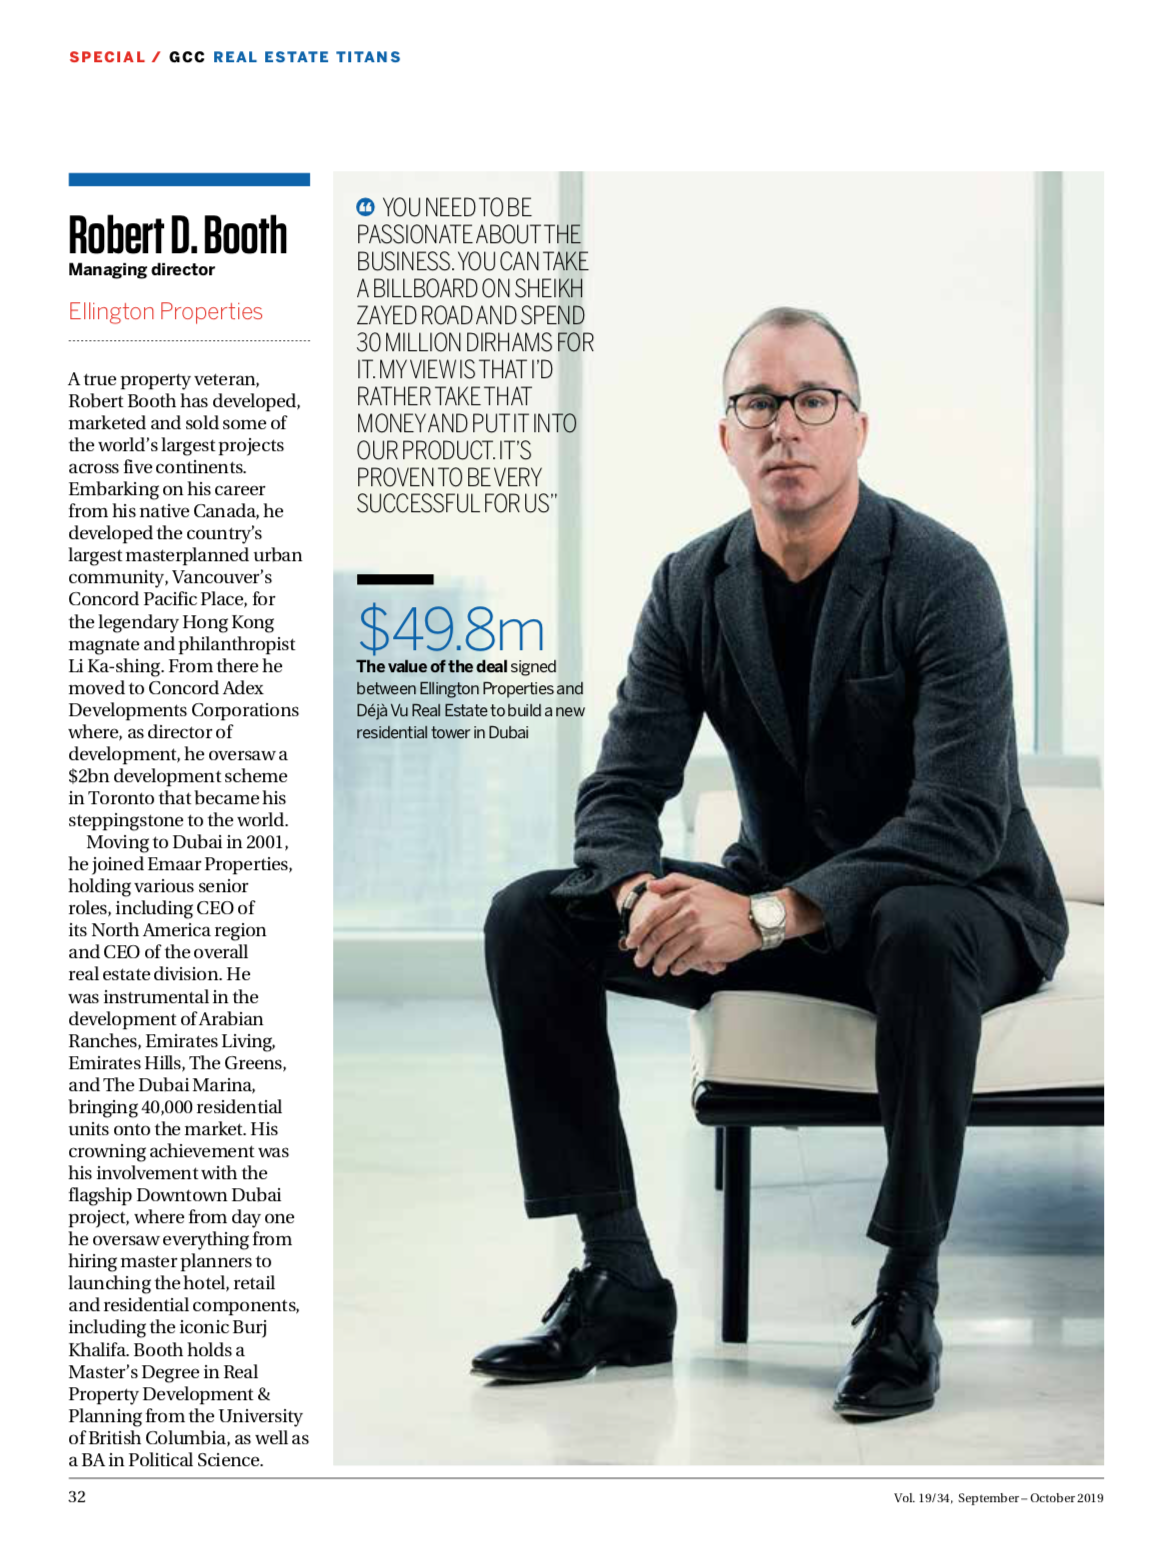 Robert Booth Article on Arabian Business - Real Estate Titans 